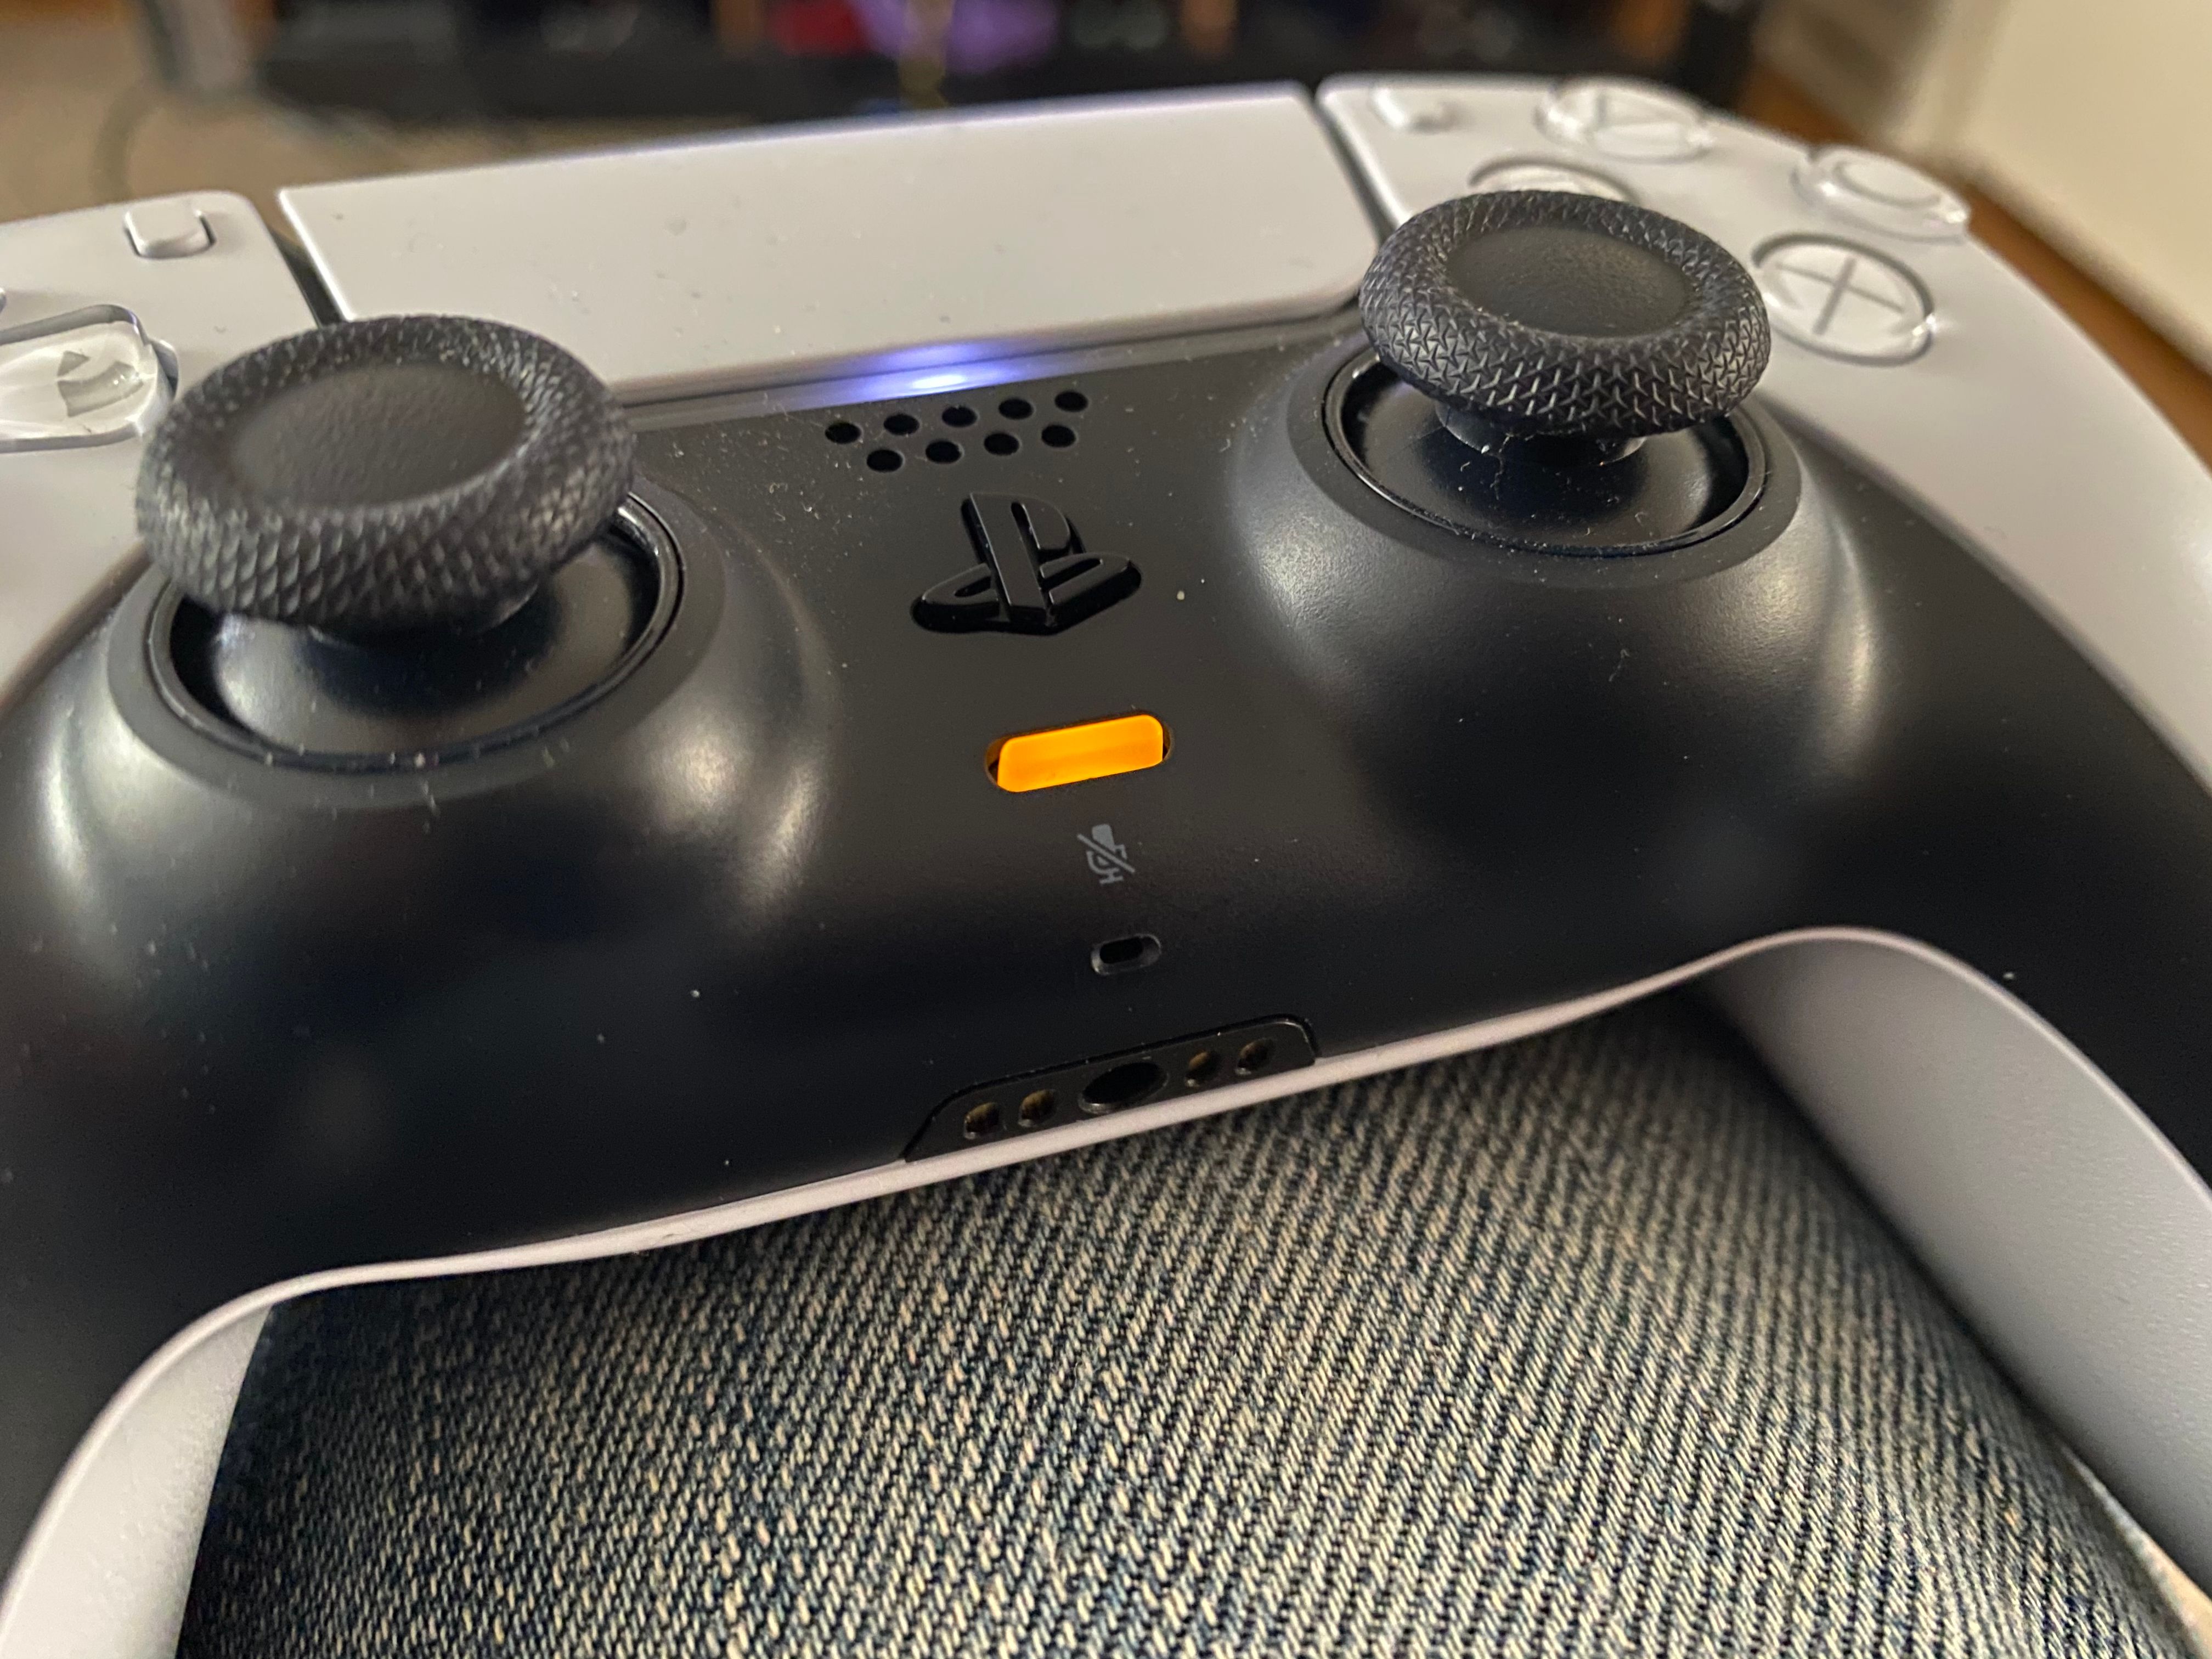 PS5 Controller Muted Mic